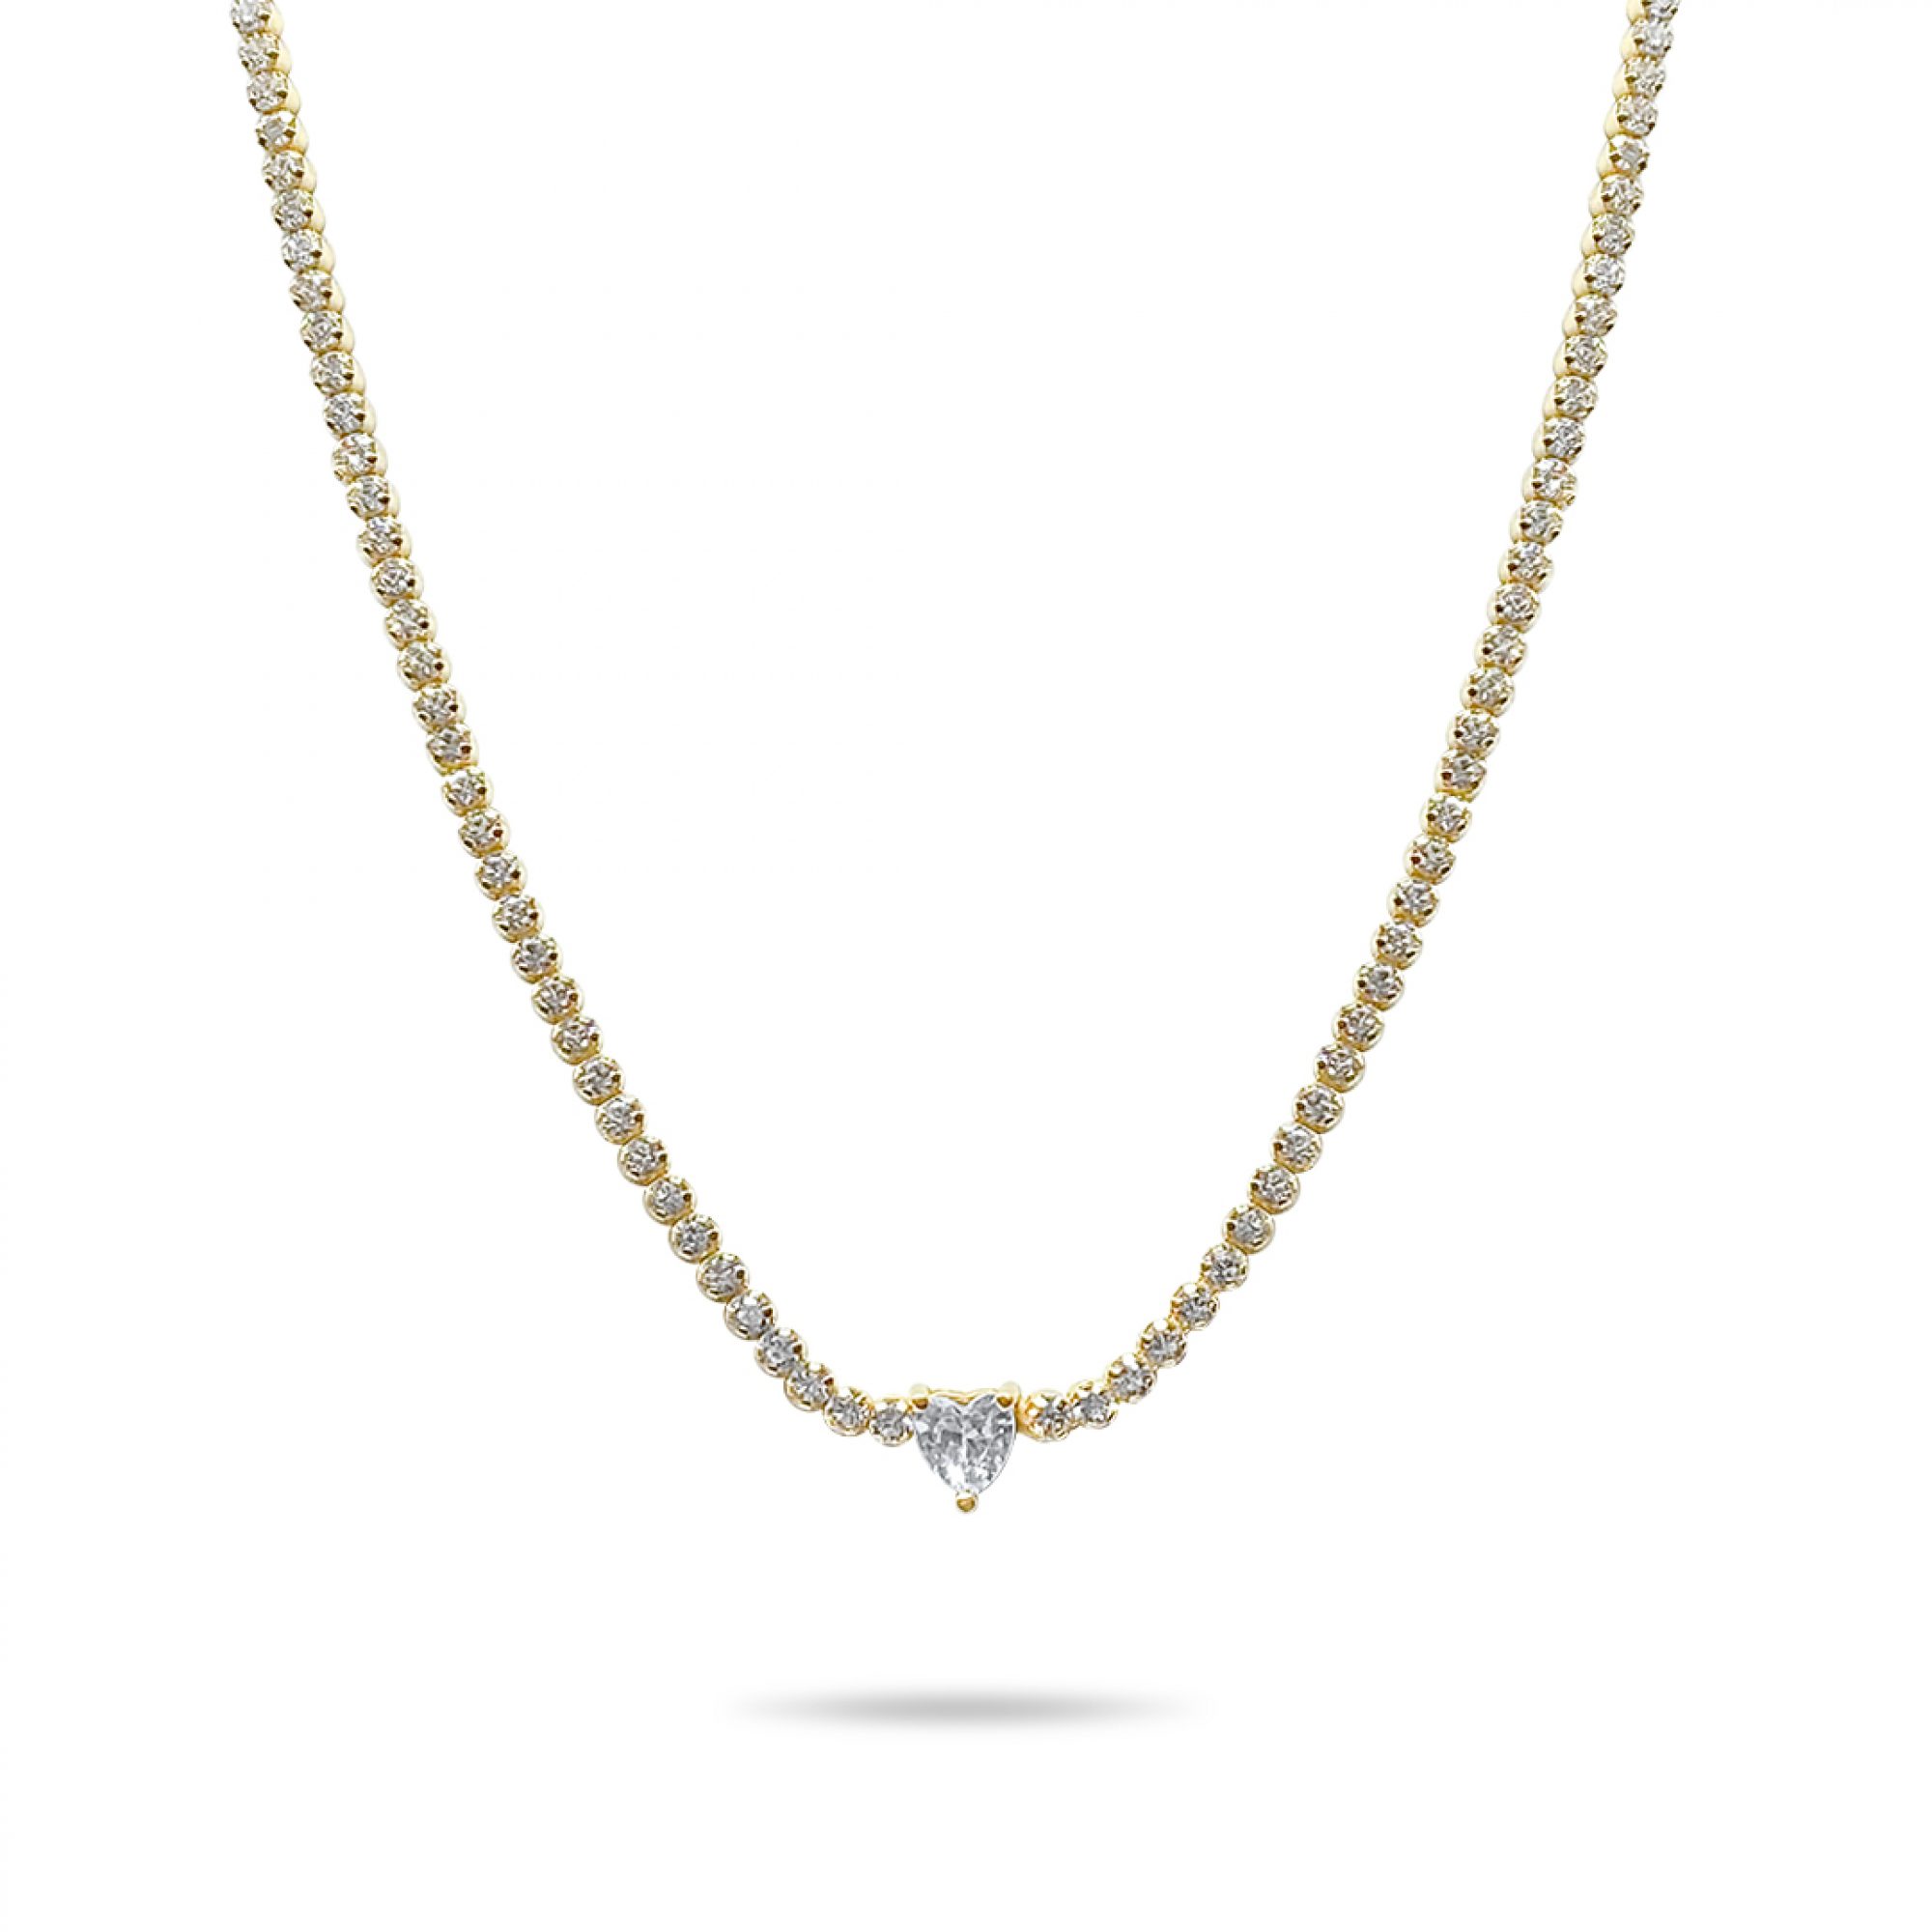 Gold plated heart necklace with zircon stones 